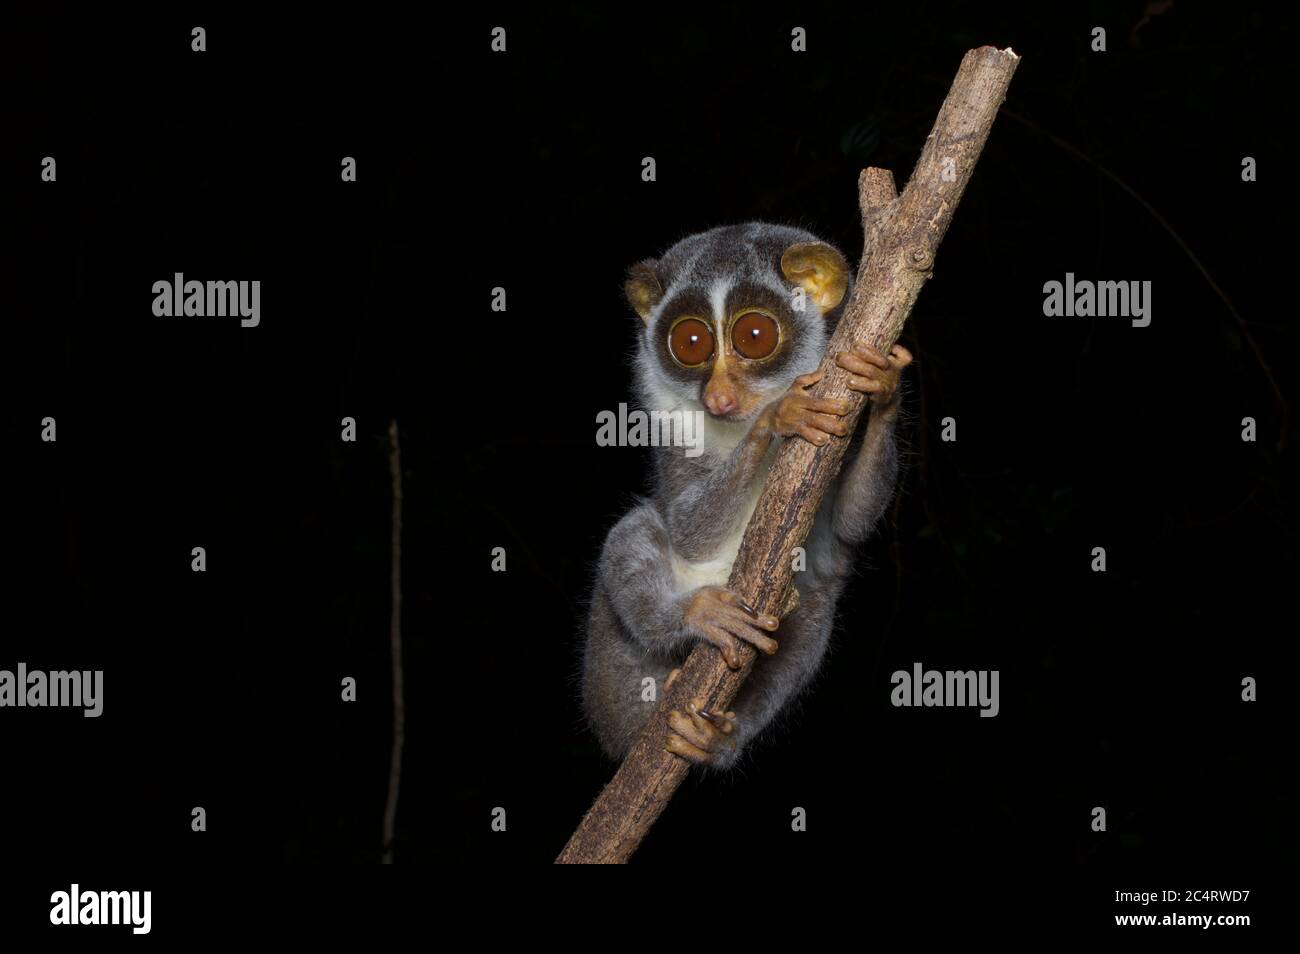 A cute, big-eyed Highlands Grey Slender Loris (Loris lydekkerianus grandis) on a thin branch at night in Knuckles Conservation Forest, Sri Lanka Stock Photo